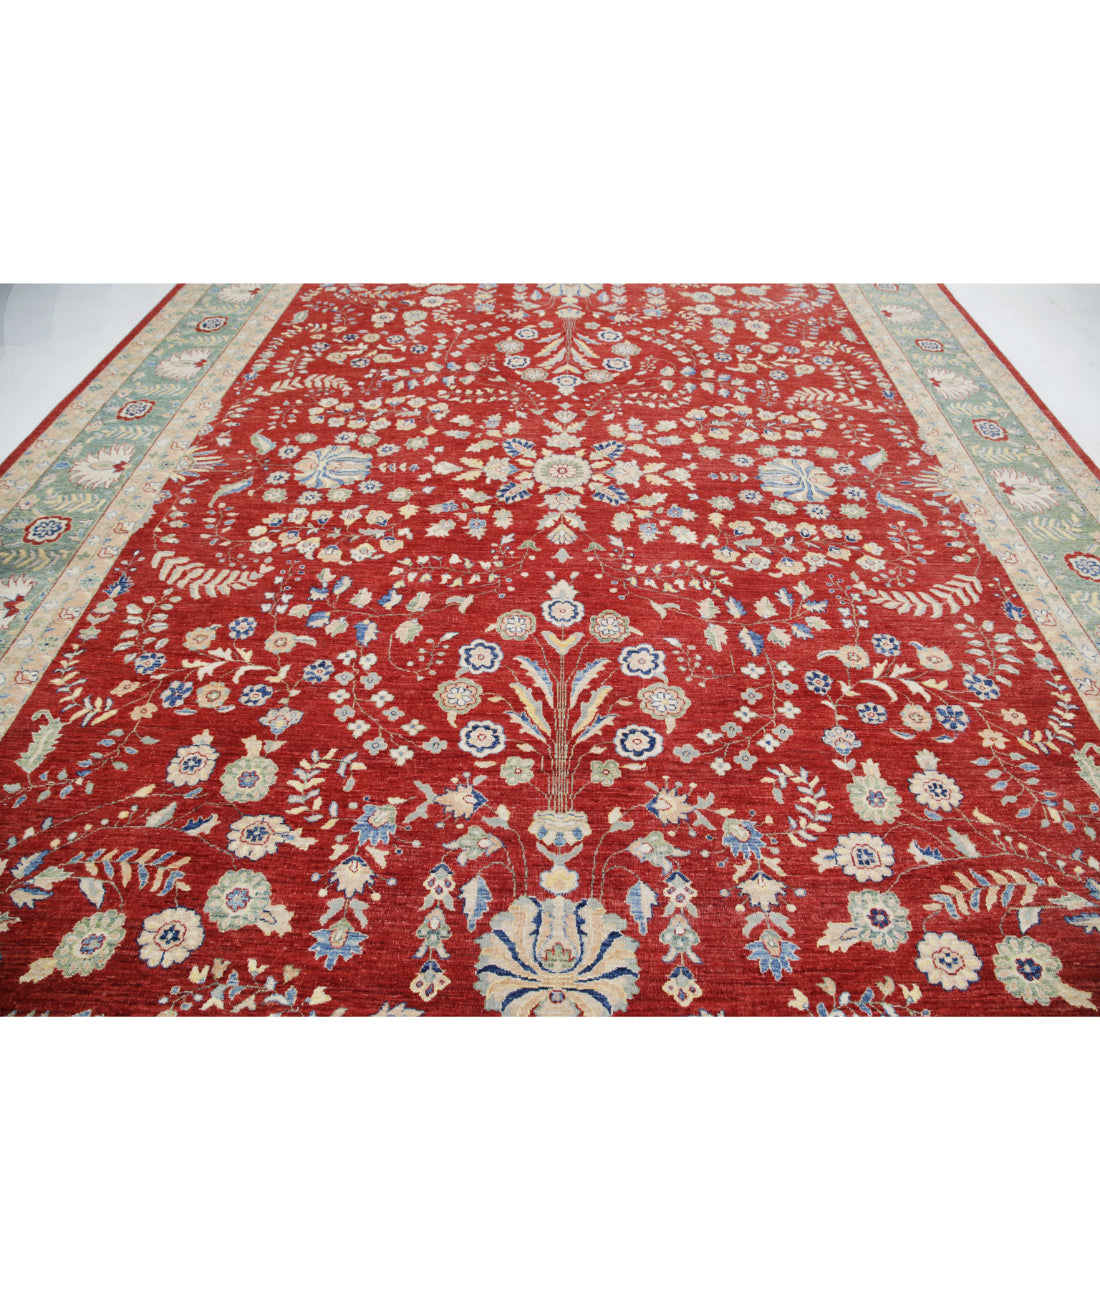 Ziegler 11'8'' X 14'7'' Hand-Knotted Wool Rug 11'8'' x 14'7'' (350 X 438) / Red / N/A